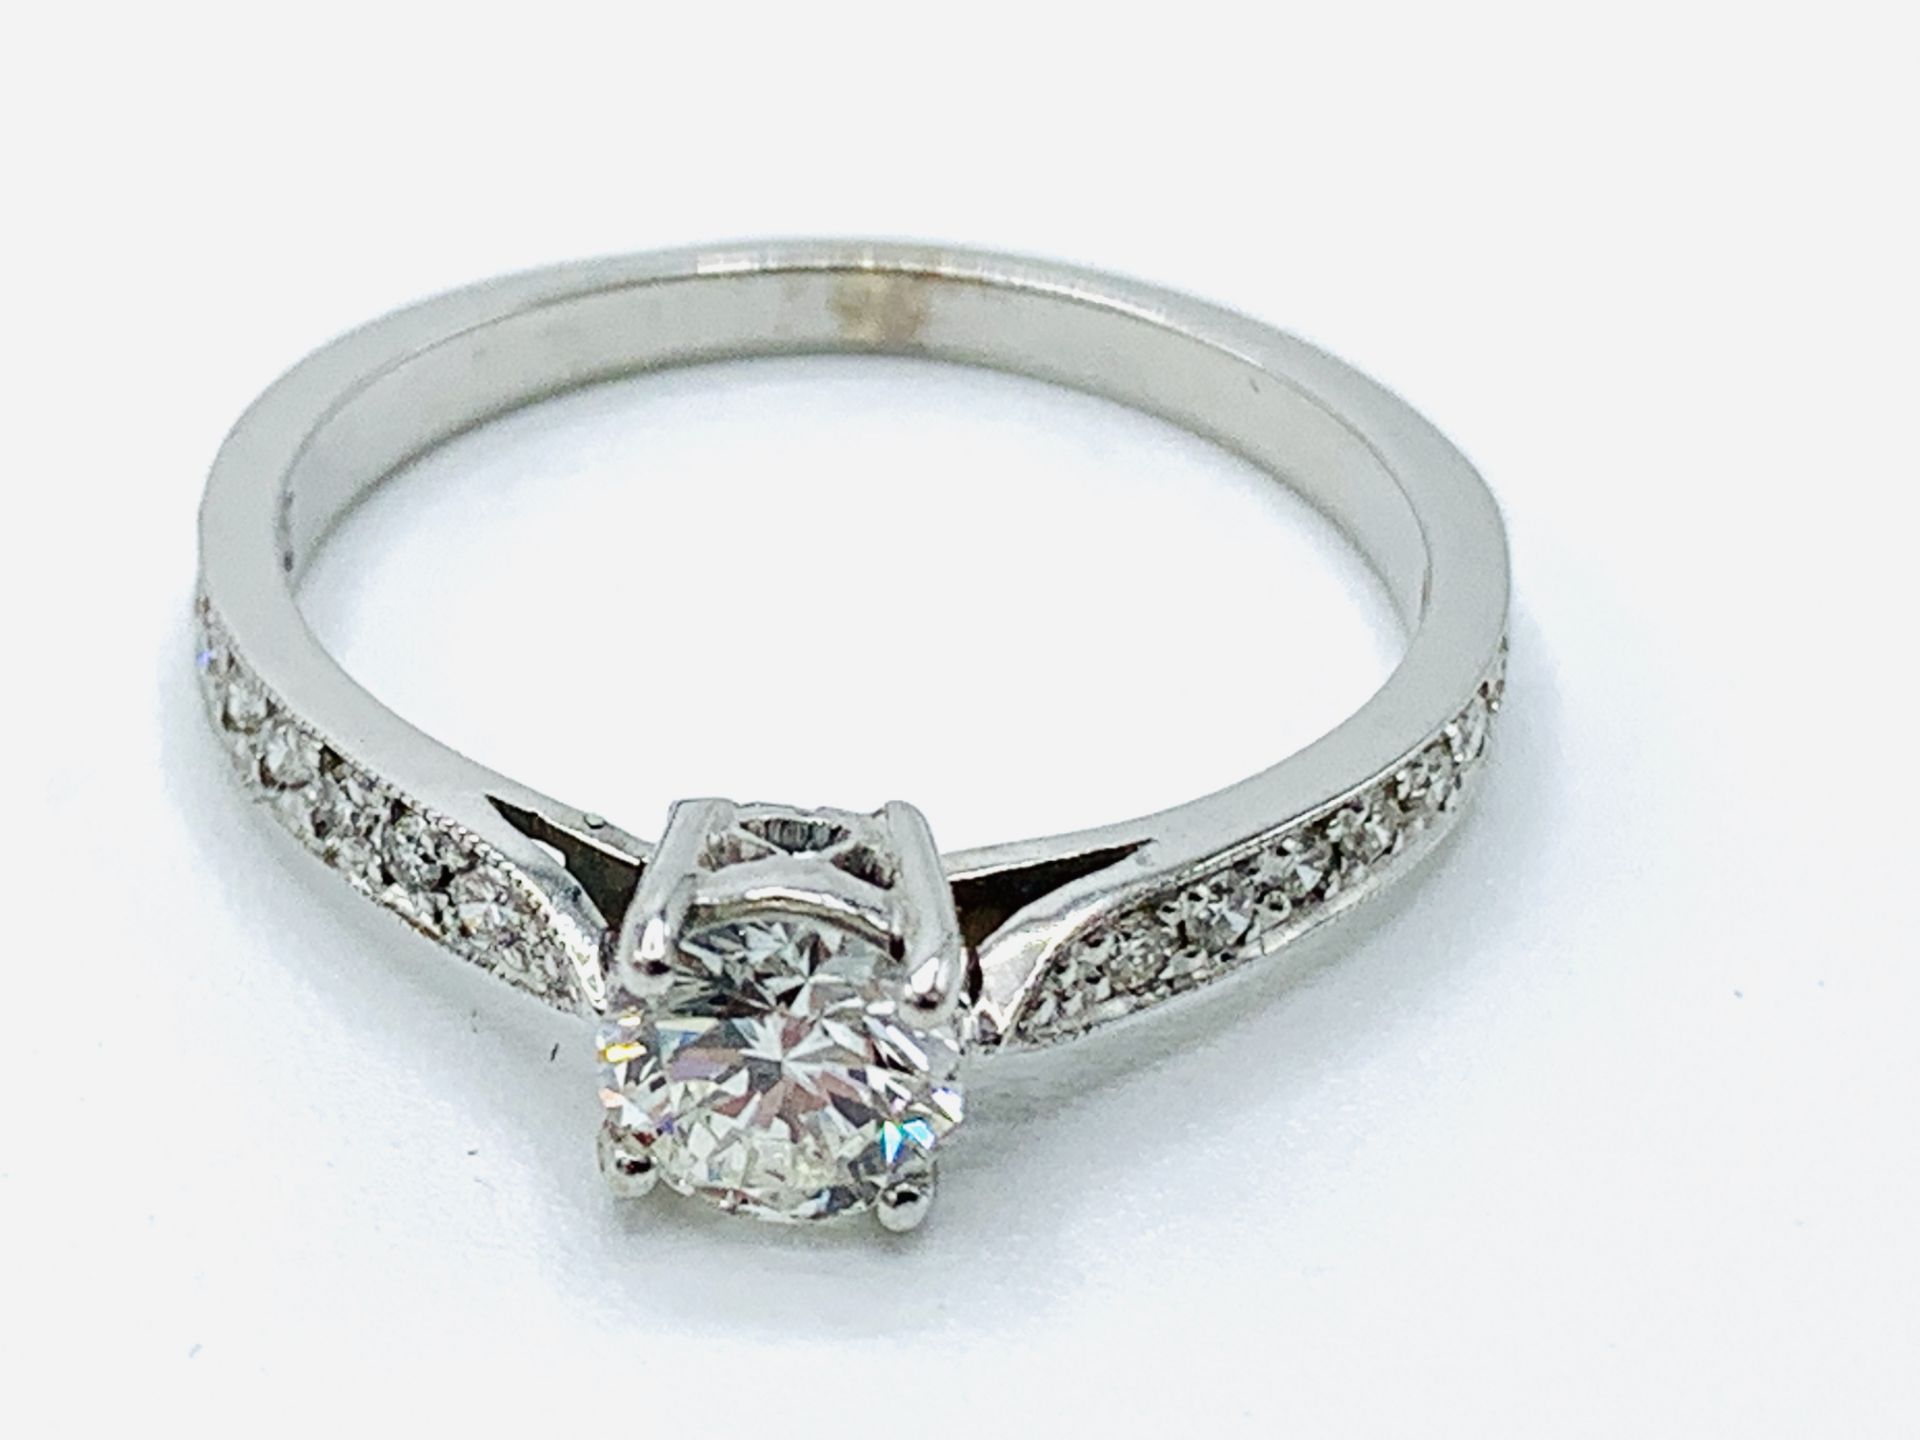 White gold solitaire ring with diamond shoulders - Image 2 of 4